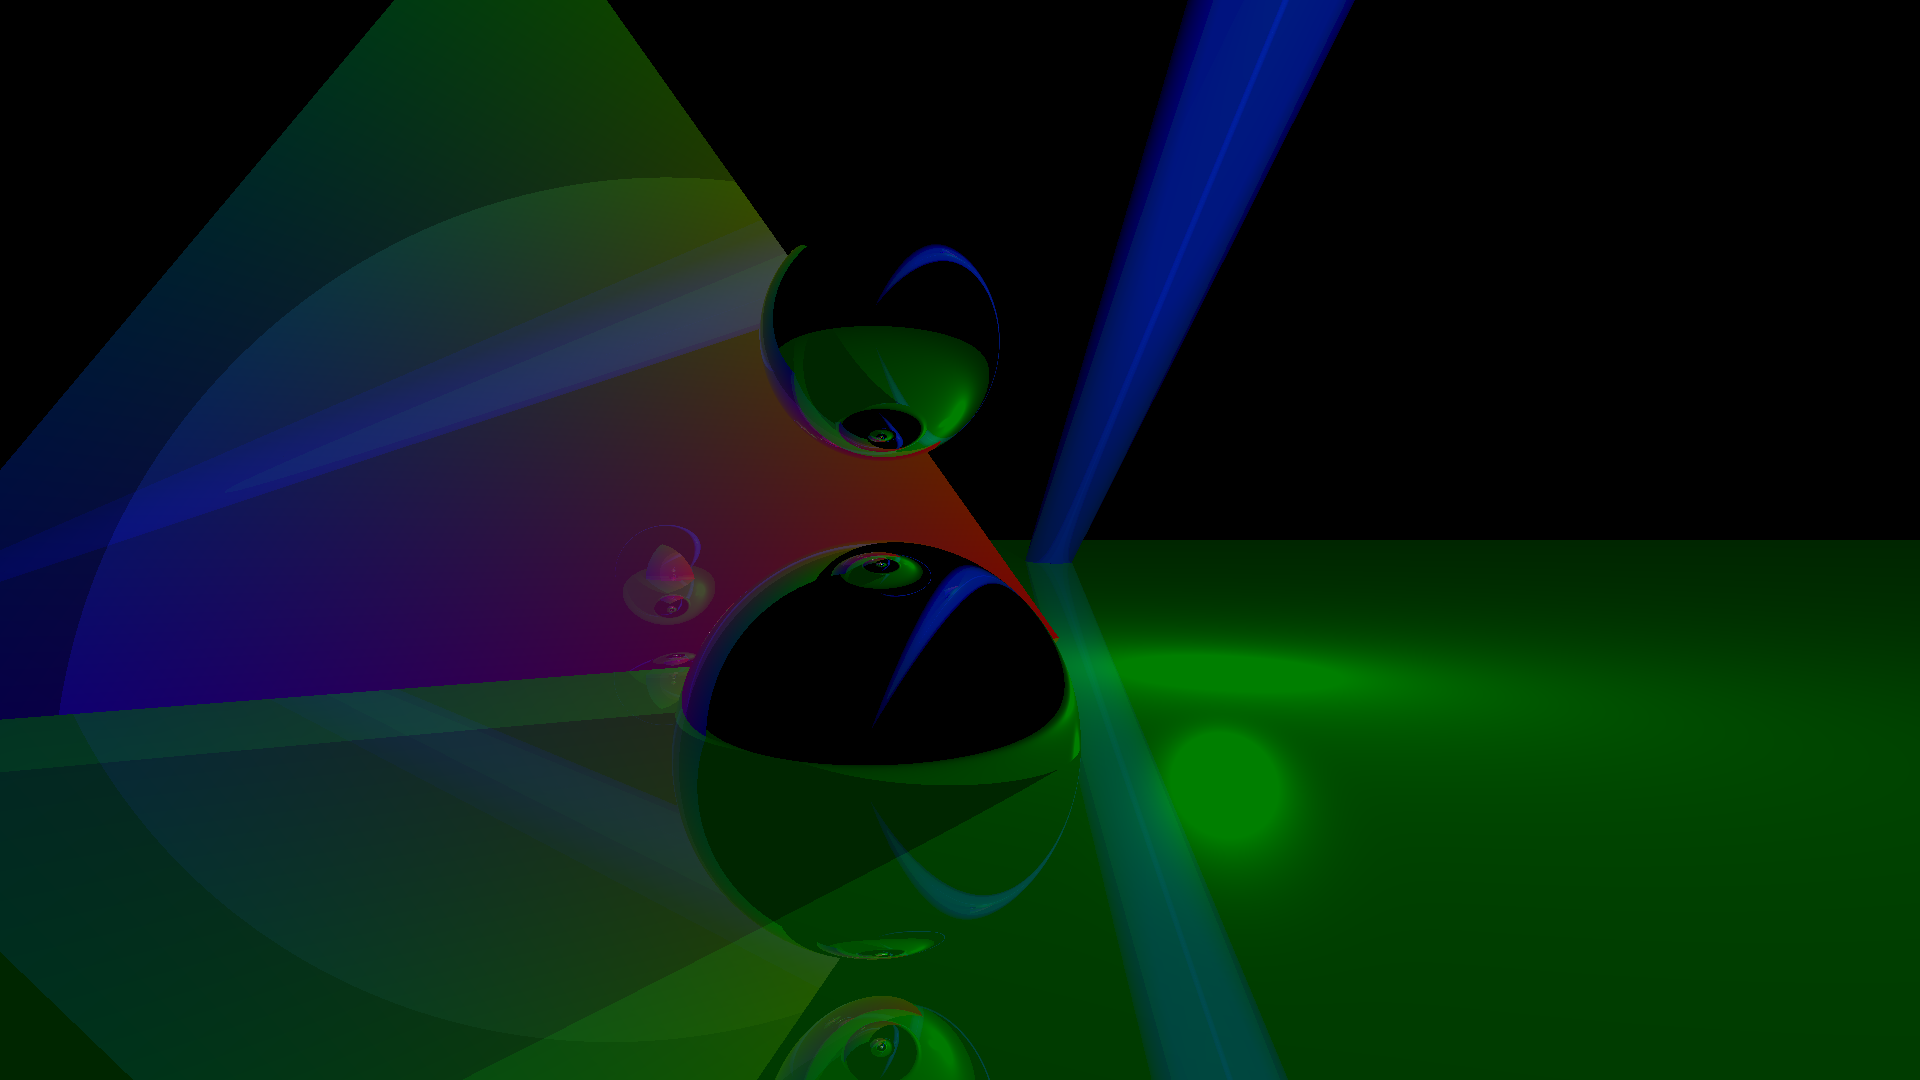 Rendered image of the raytracer